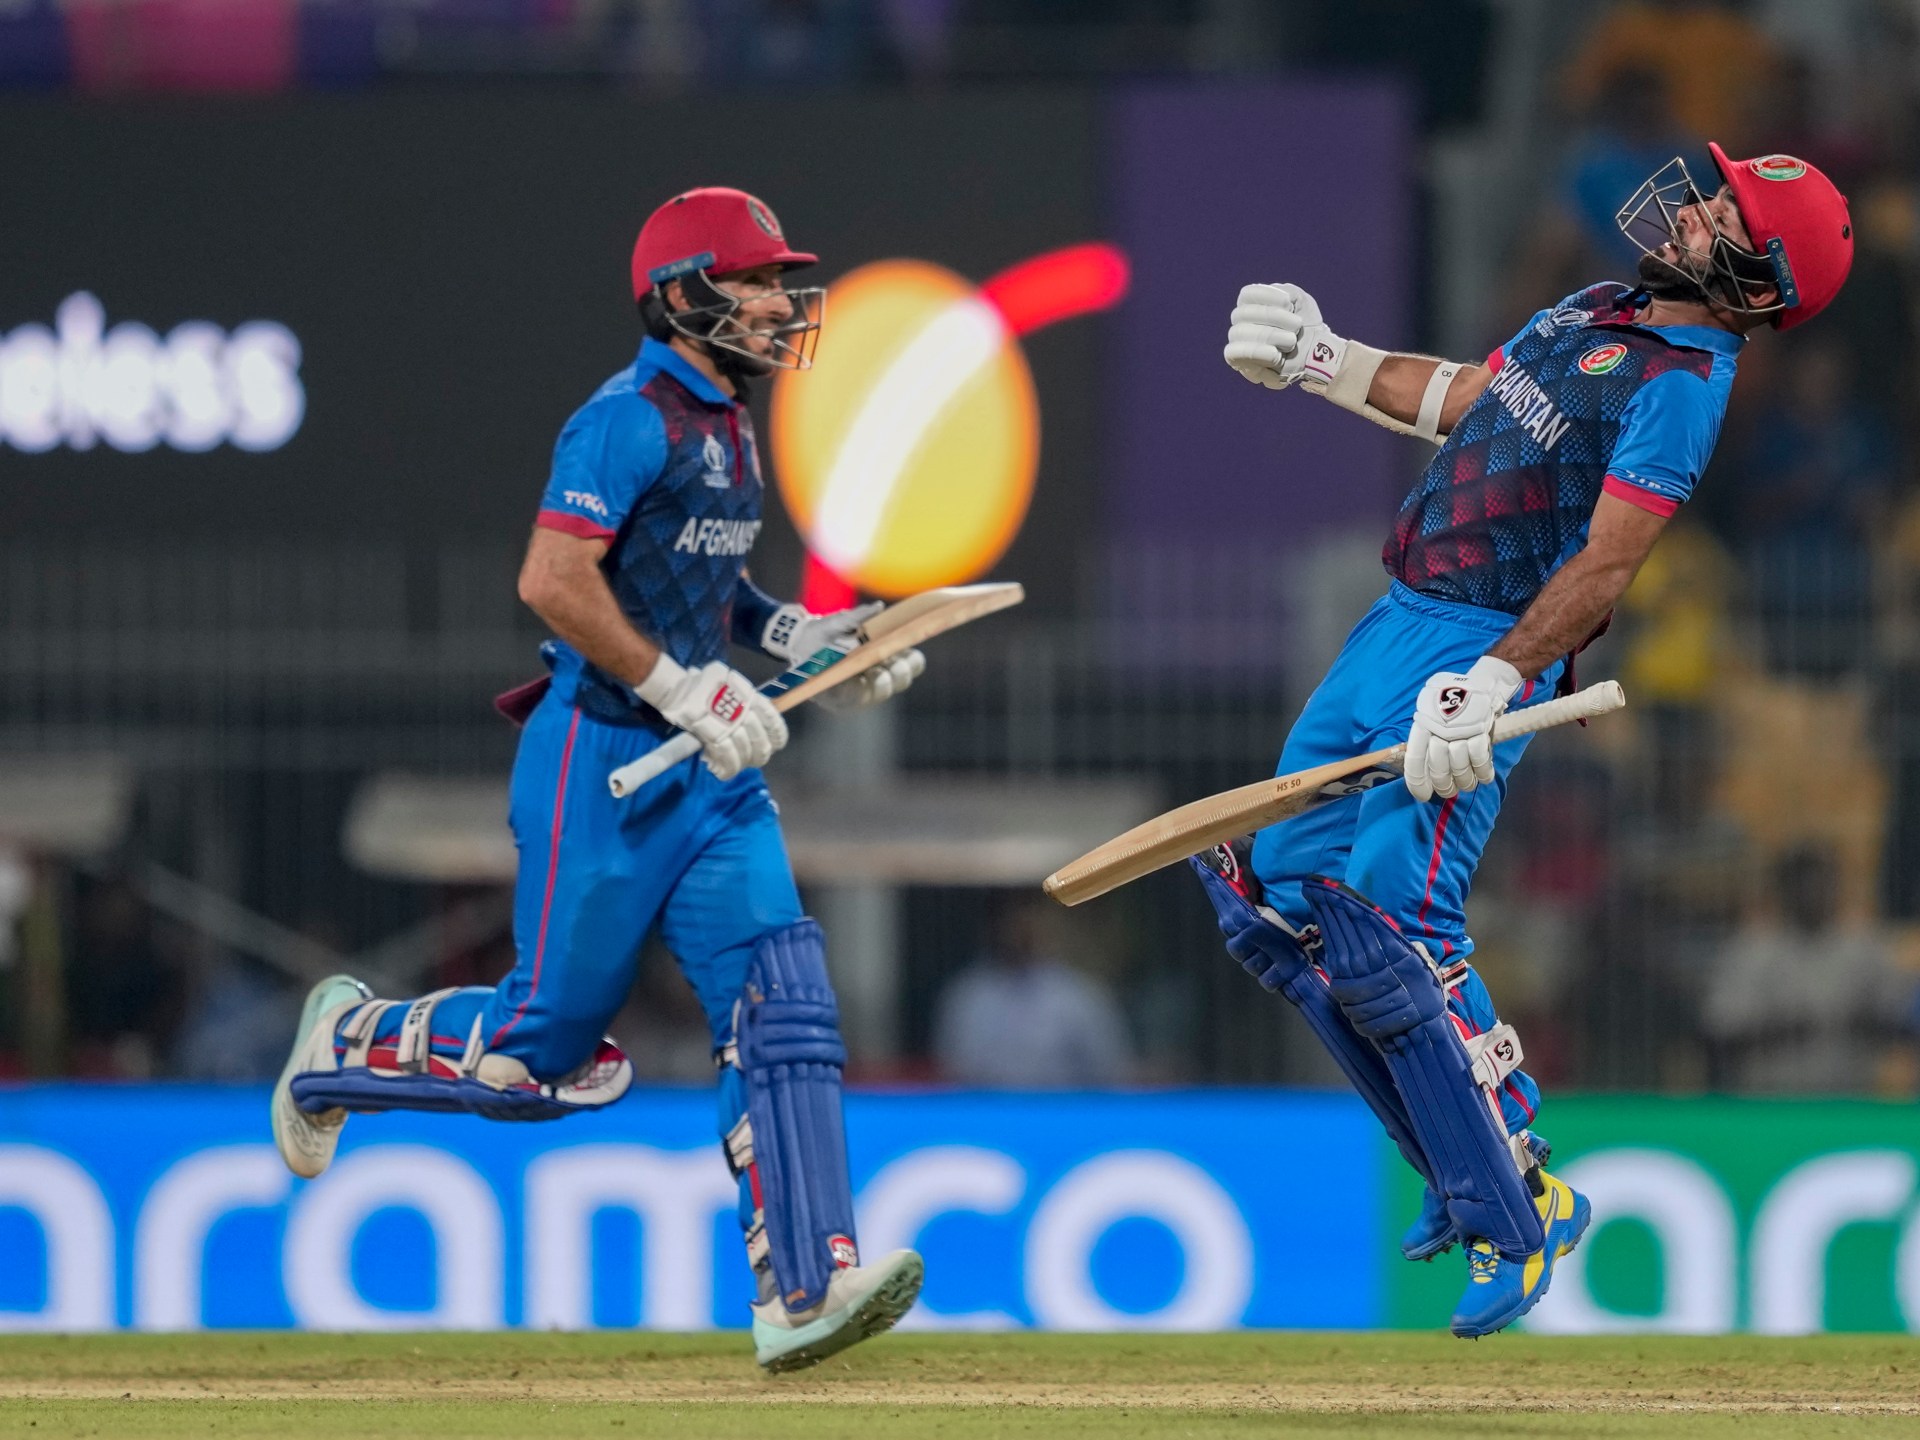 Afghanistan shocks rivals Pakistan in historic Cricket World Cup win |  ICC Cricket World Cup News